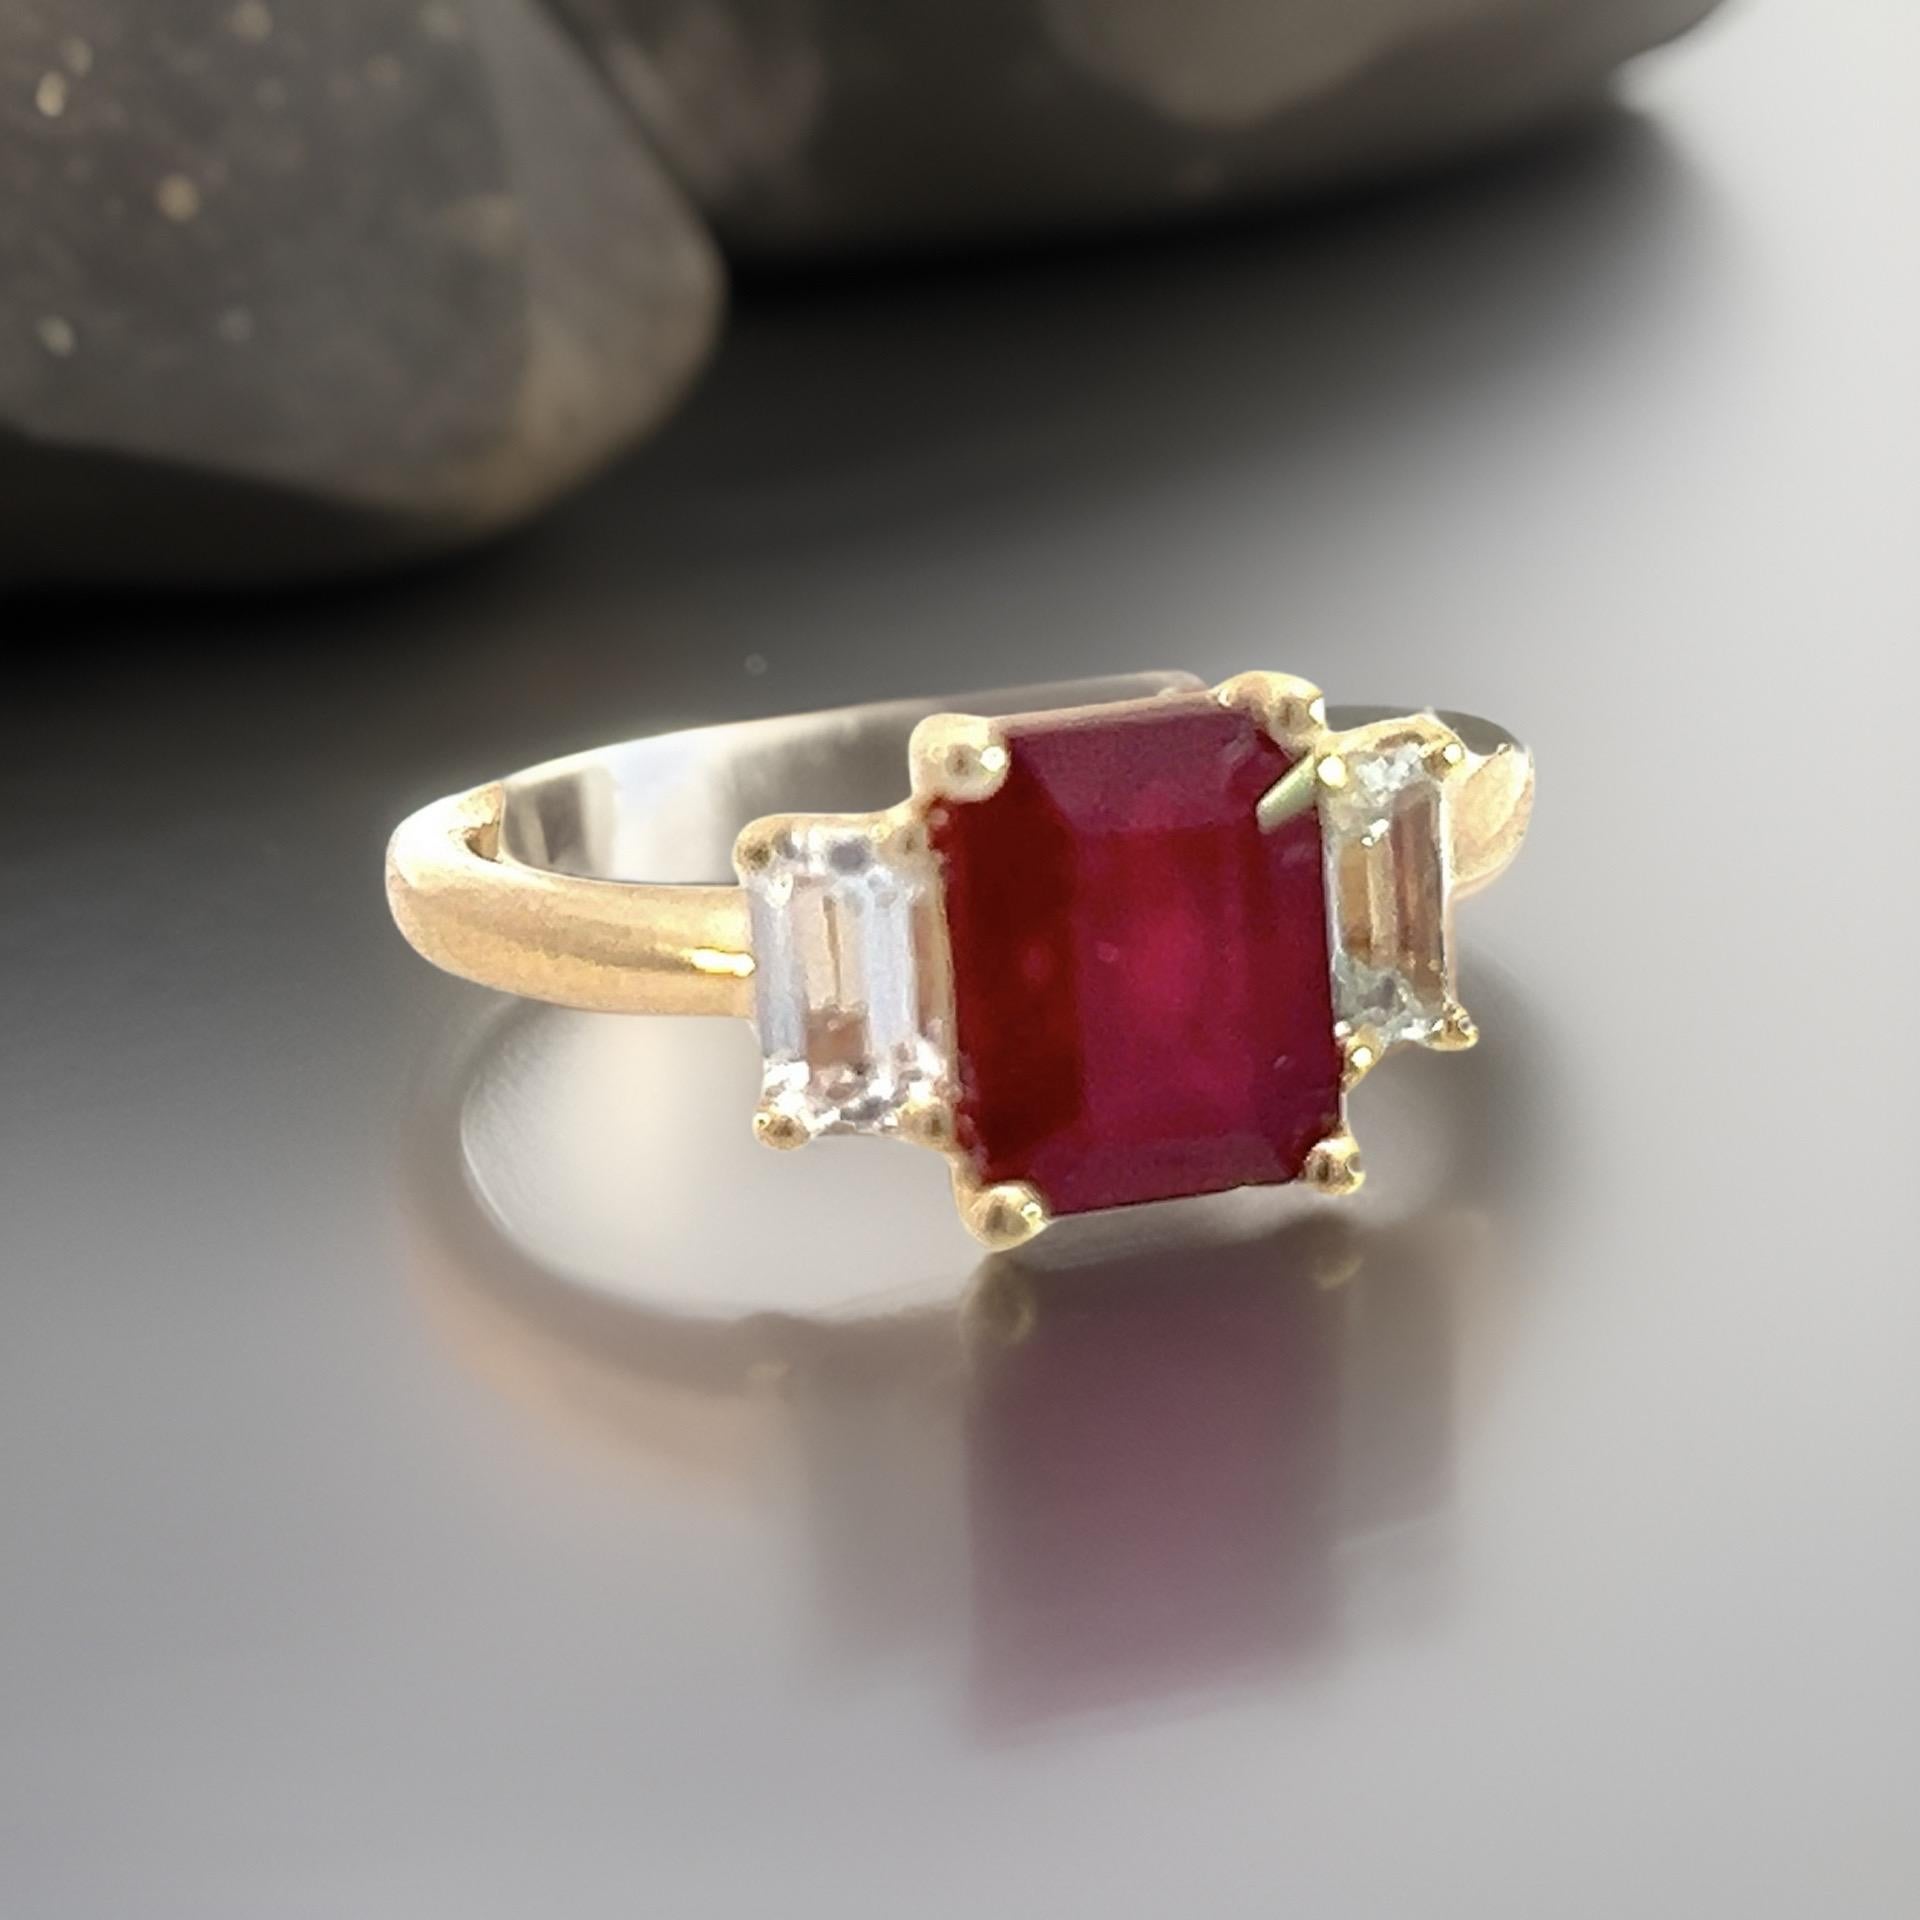 Natural Ruby Sapphire Ring 6.5 14k Y Gold 2.51 TCW Certified For Sale 8